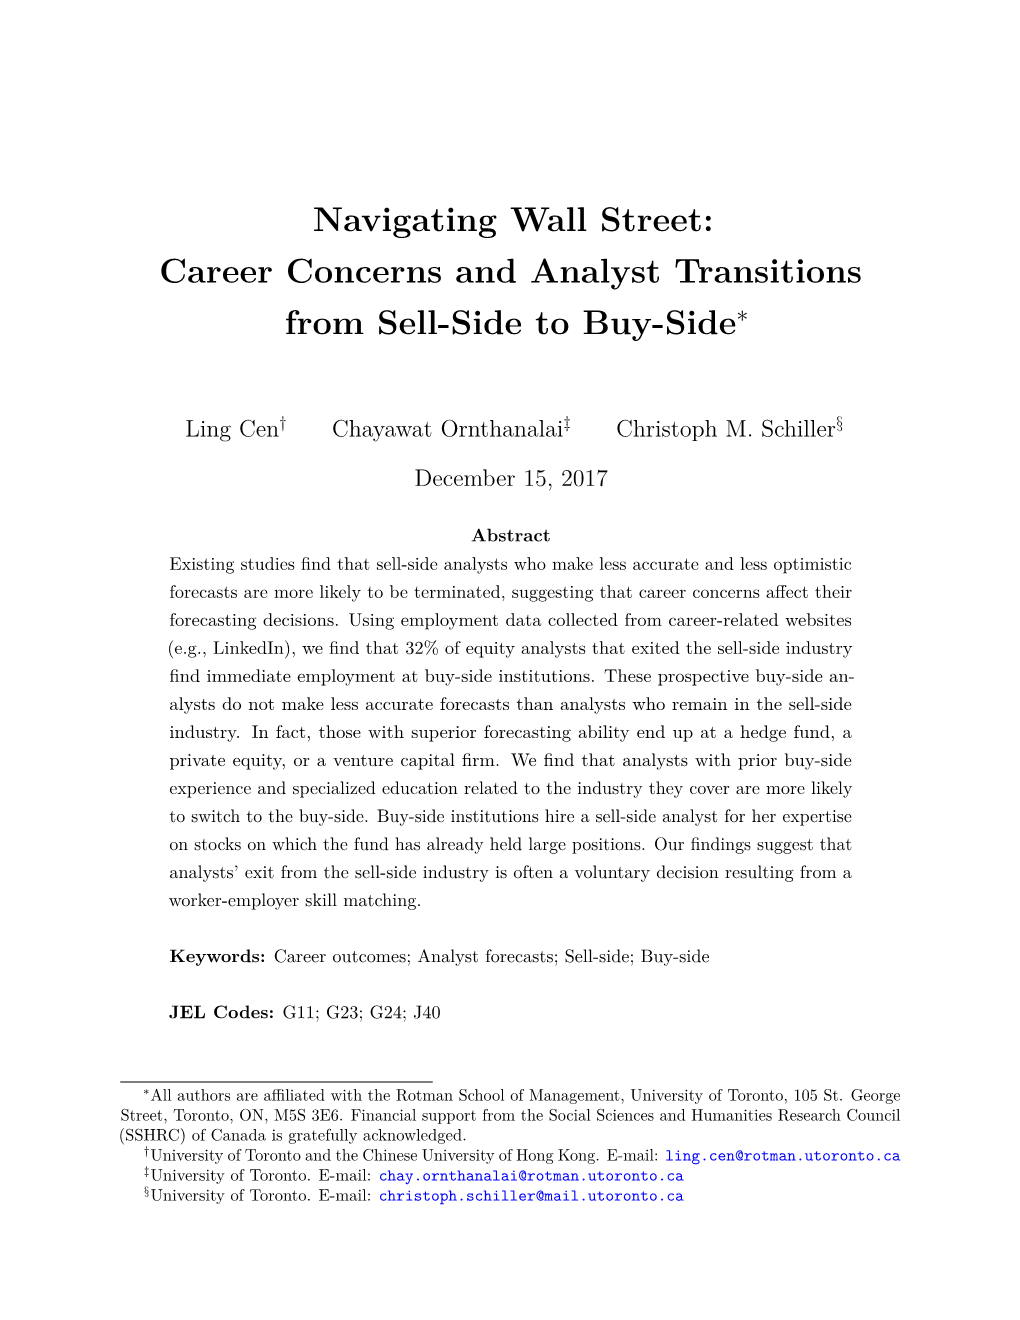 Career Concerns and Analyst Transitions from Sell-Side to Buy-Side∗